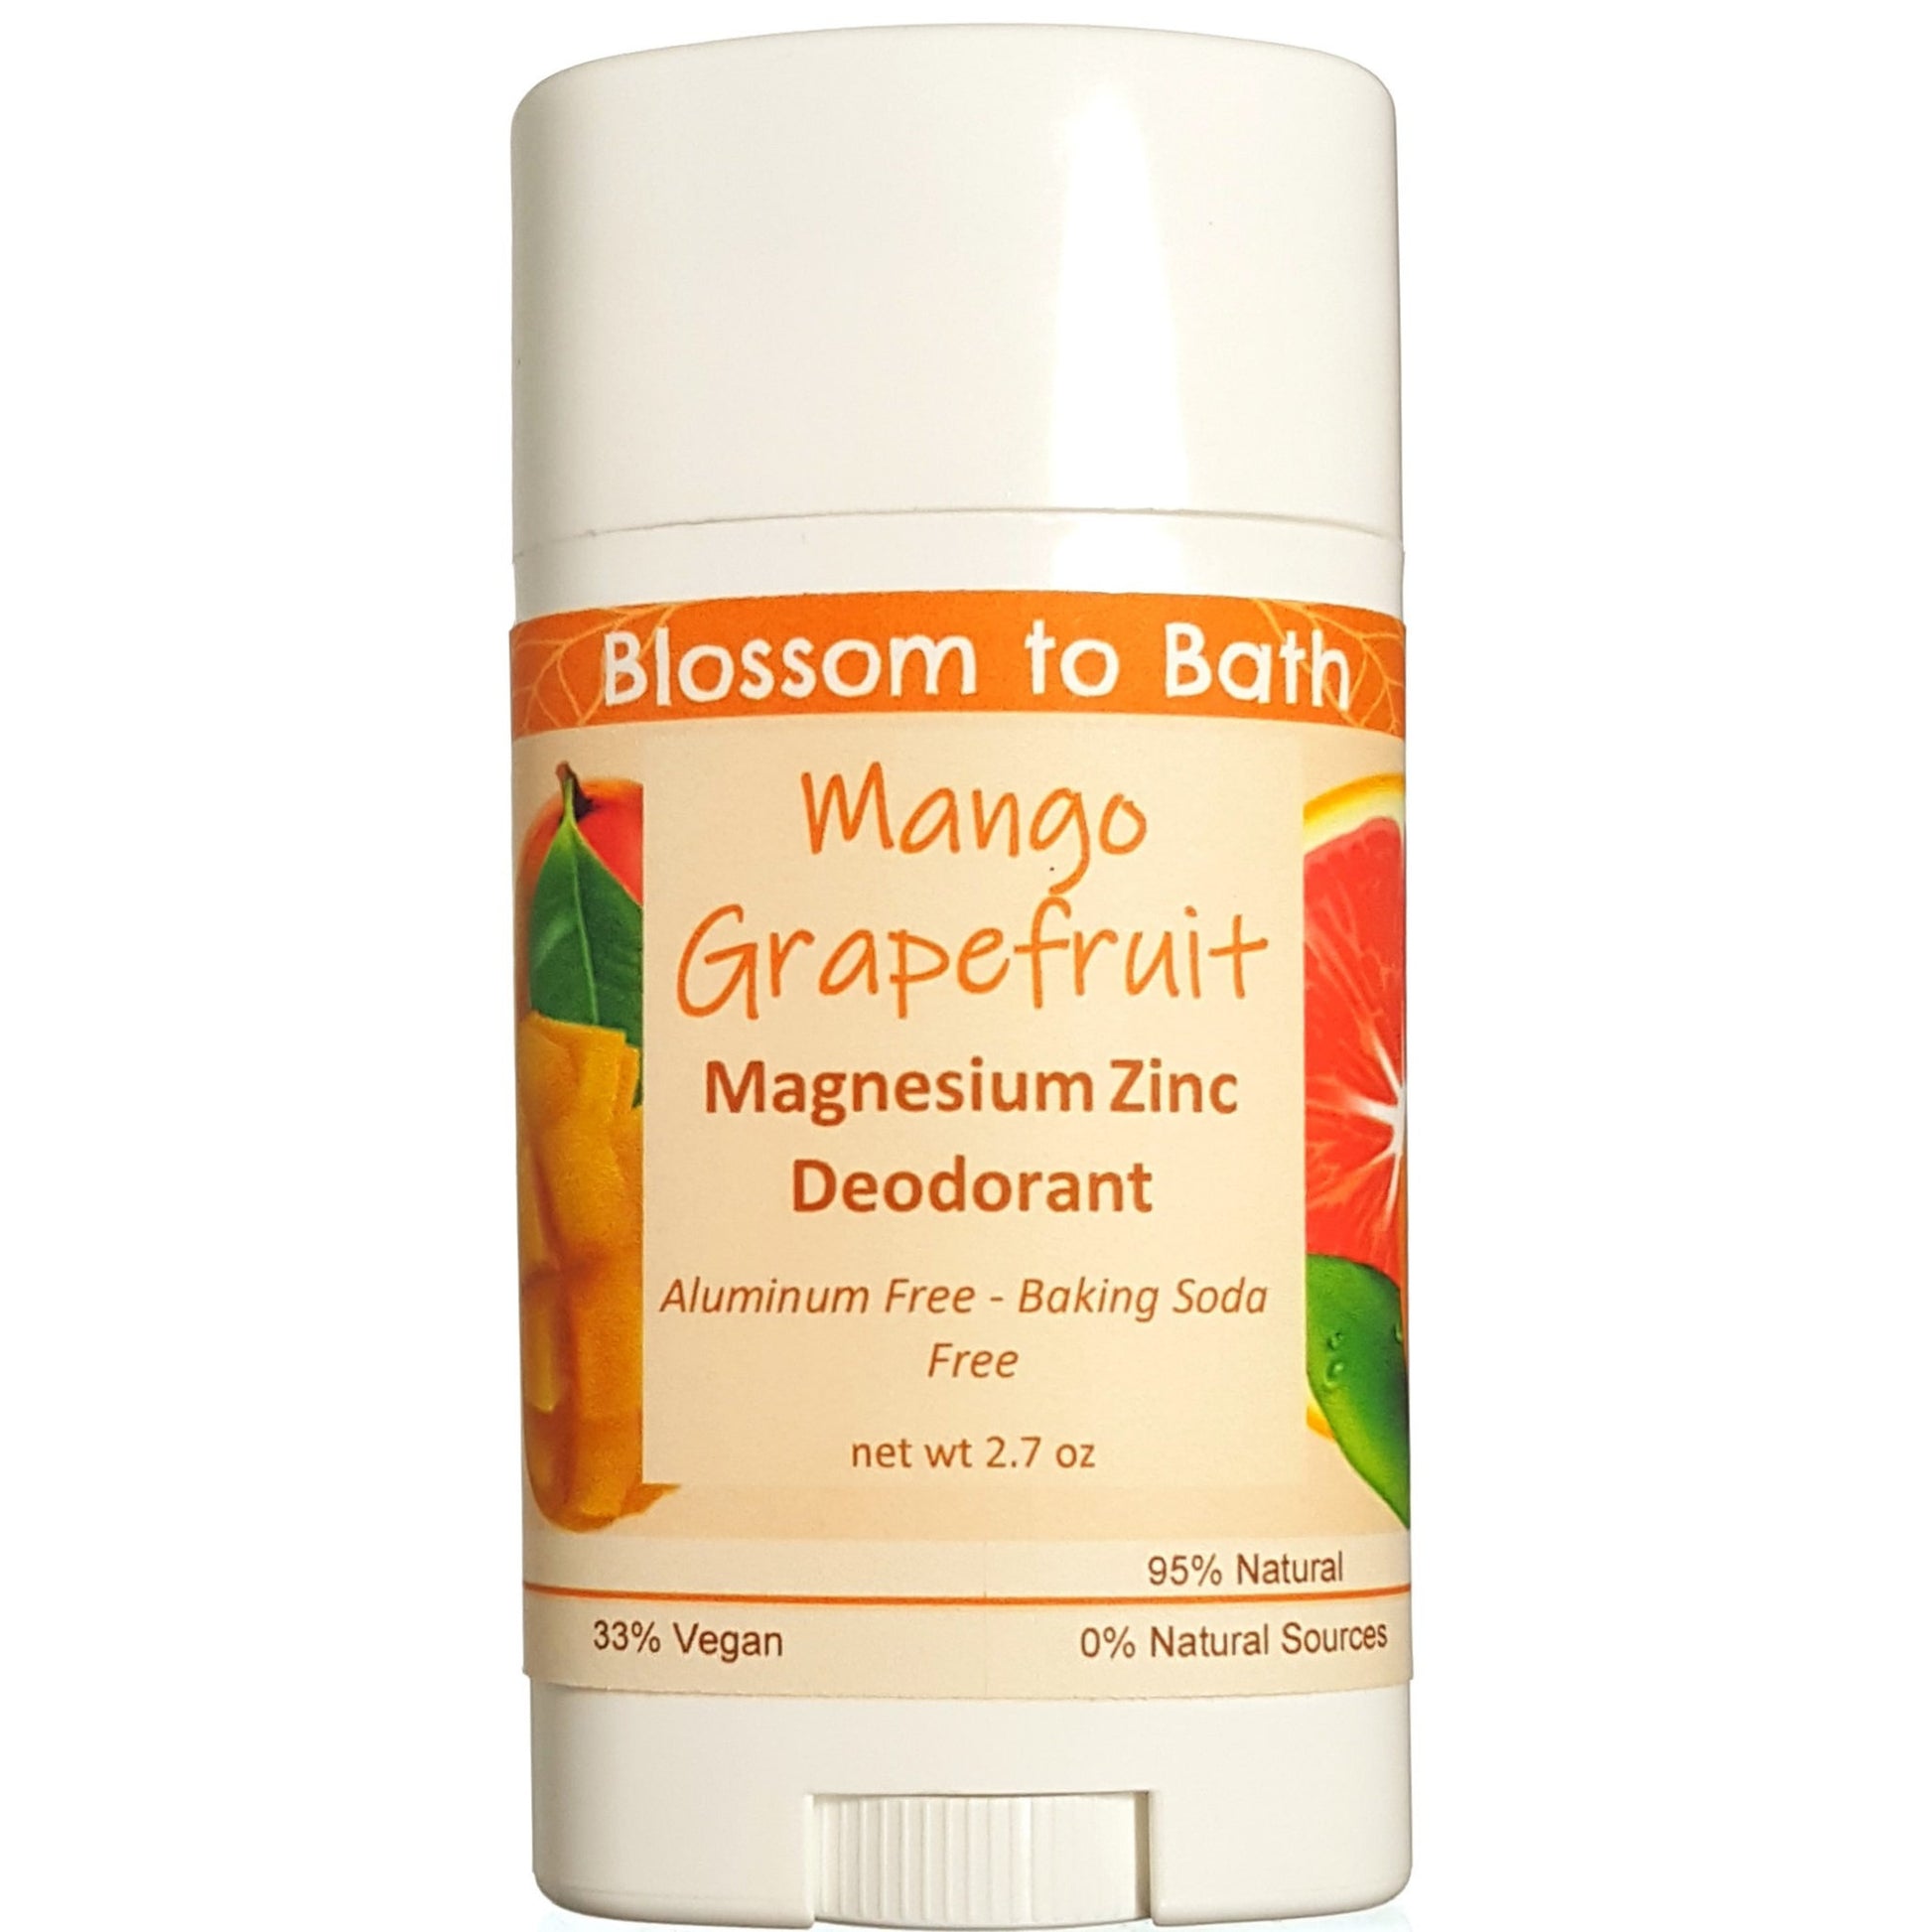 Buy Blossom to Bath Mango Grapefruit Magnesium Zinc Deodorant from Flowersong Soap Studio.  Long lasting protection made from organic botanicals and butters, made without baking soda, tested in the Arizona heat  Exotic tropical fruits in a powdery puff of sophisticated freshness.